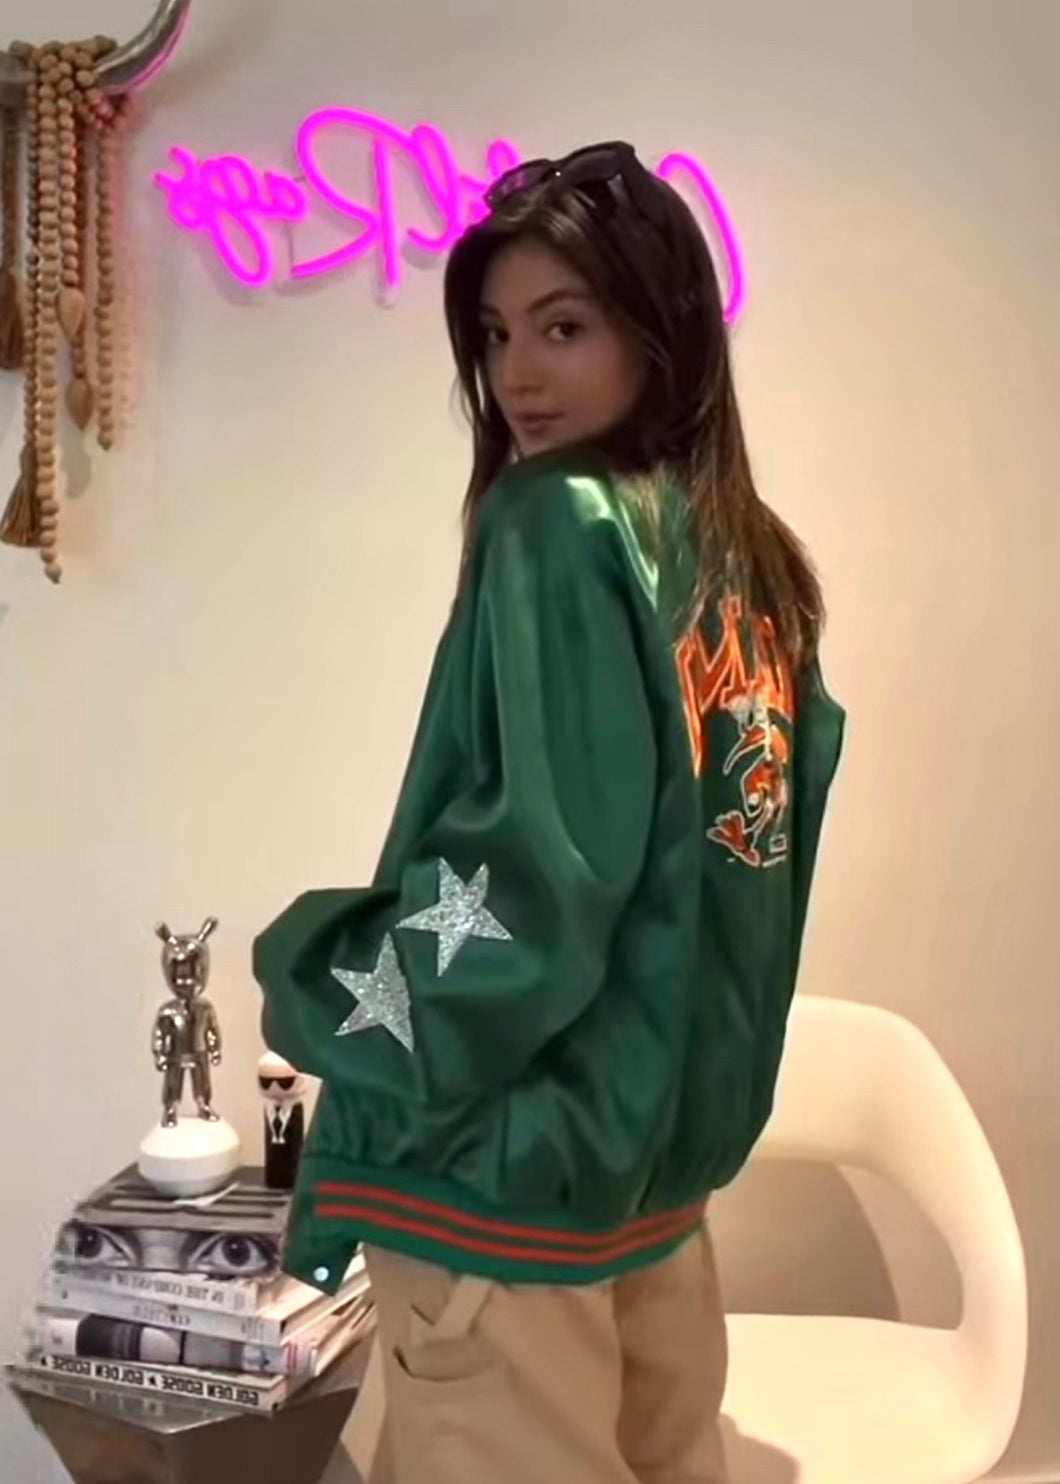 University of Miami, One of a KIND ”Rare Find” Vintage Miami Hurricanes, UM Early 80’s Satin Jacket with Crystal Star Design